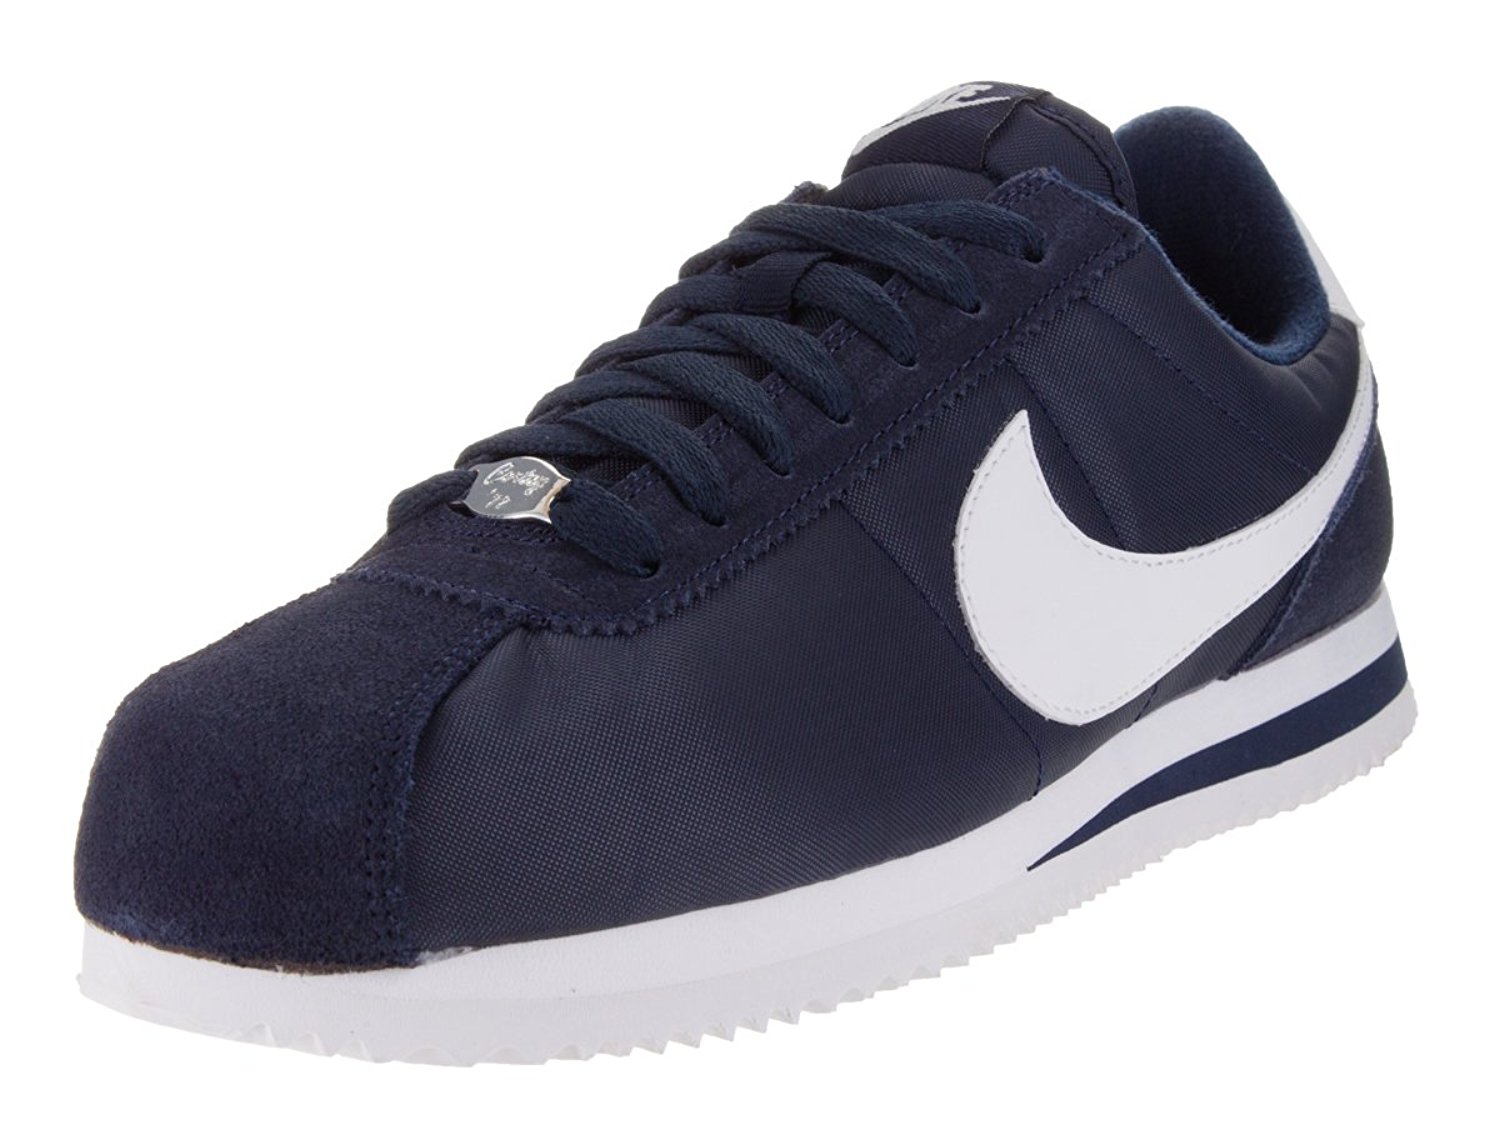 Nike Cortez Reviewed for Performance 